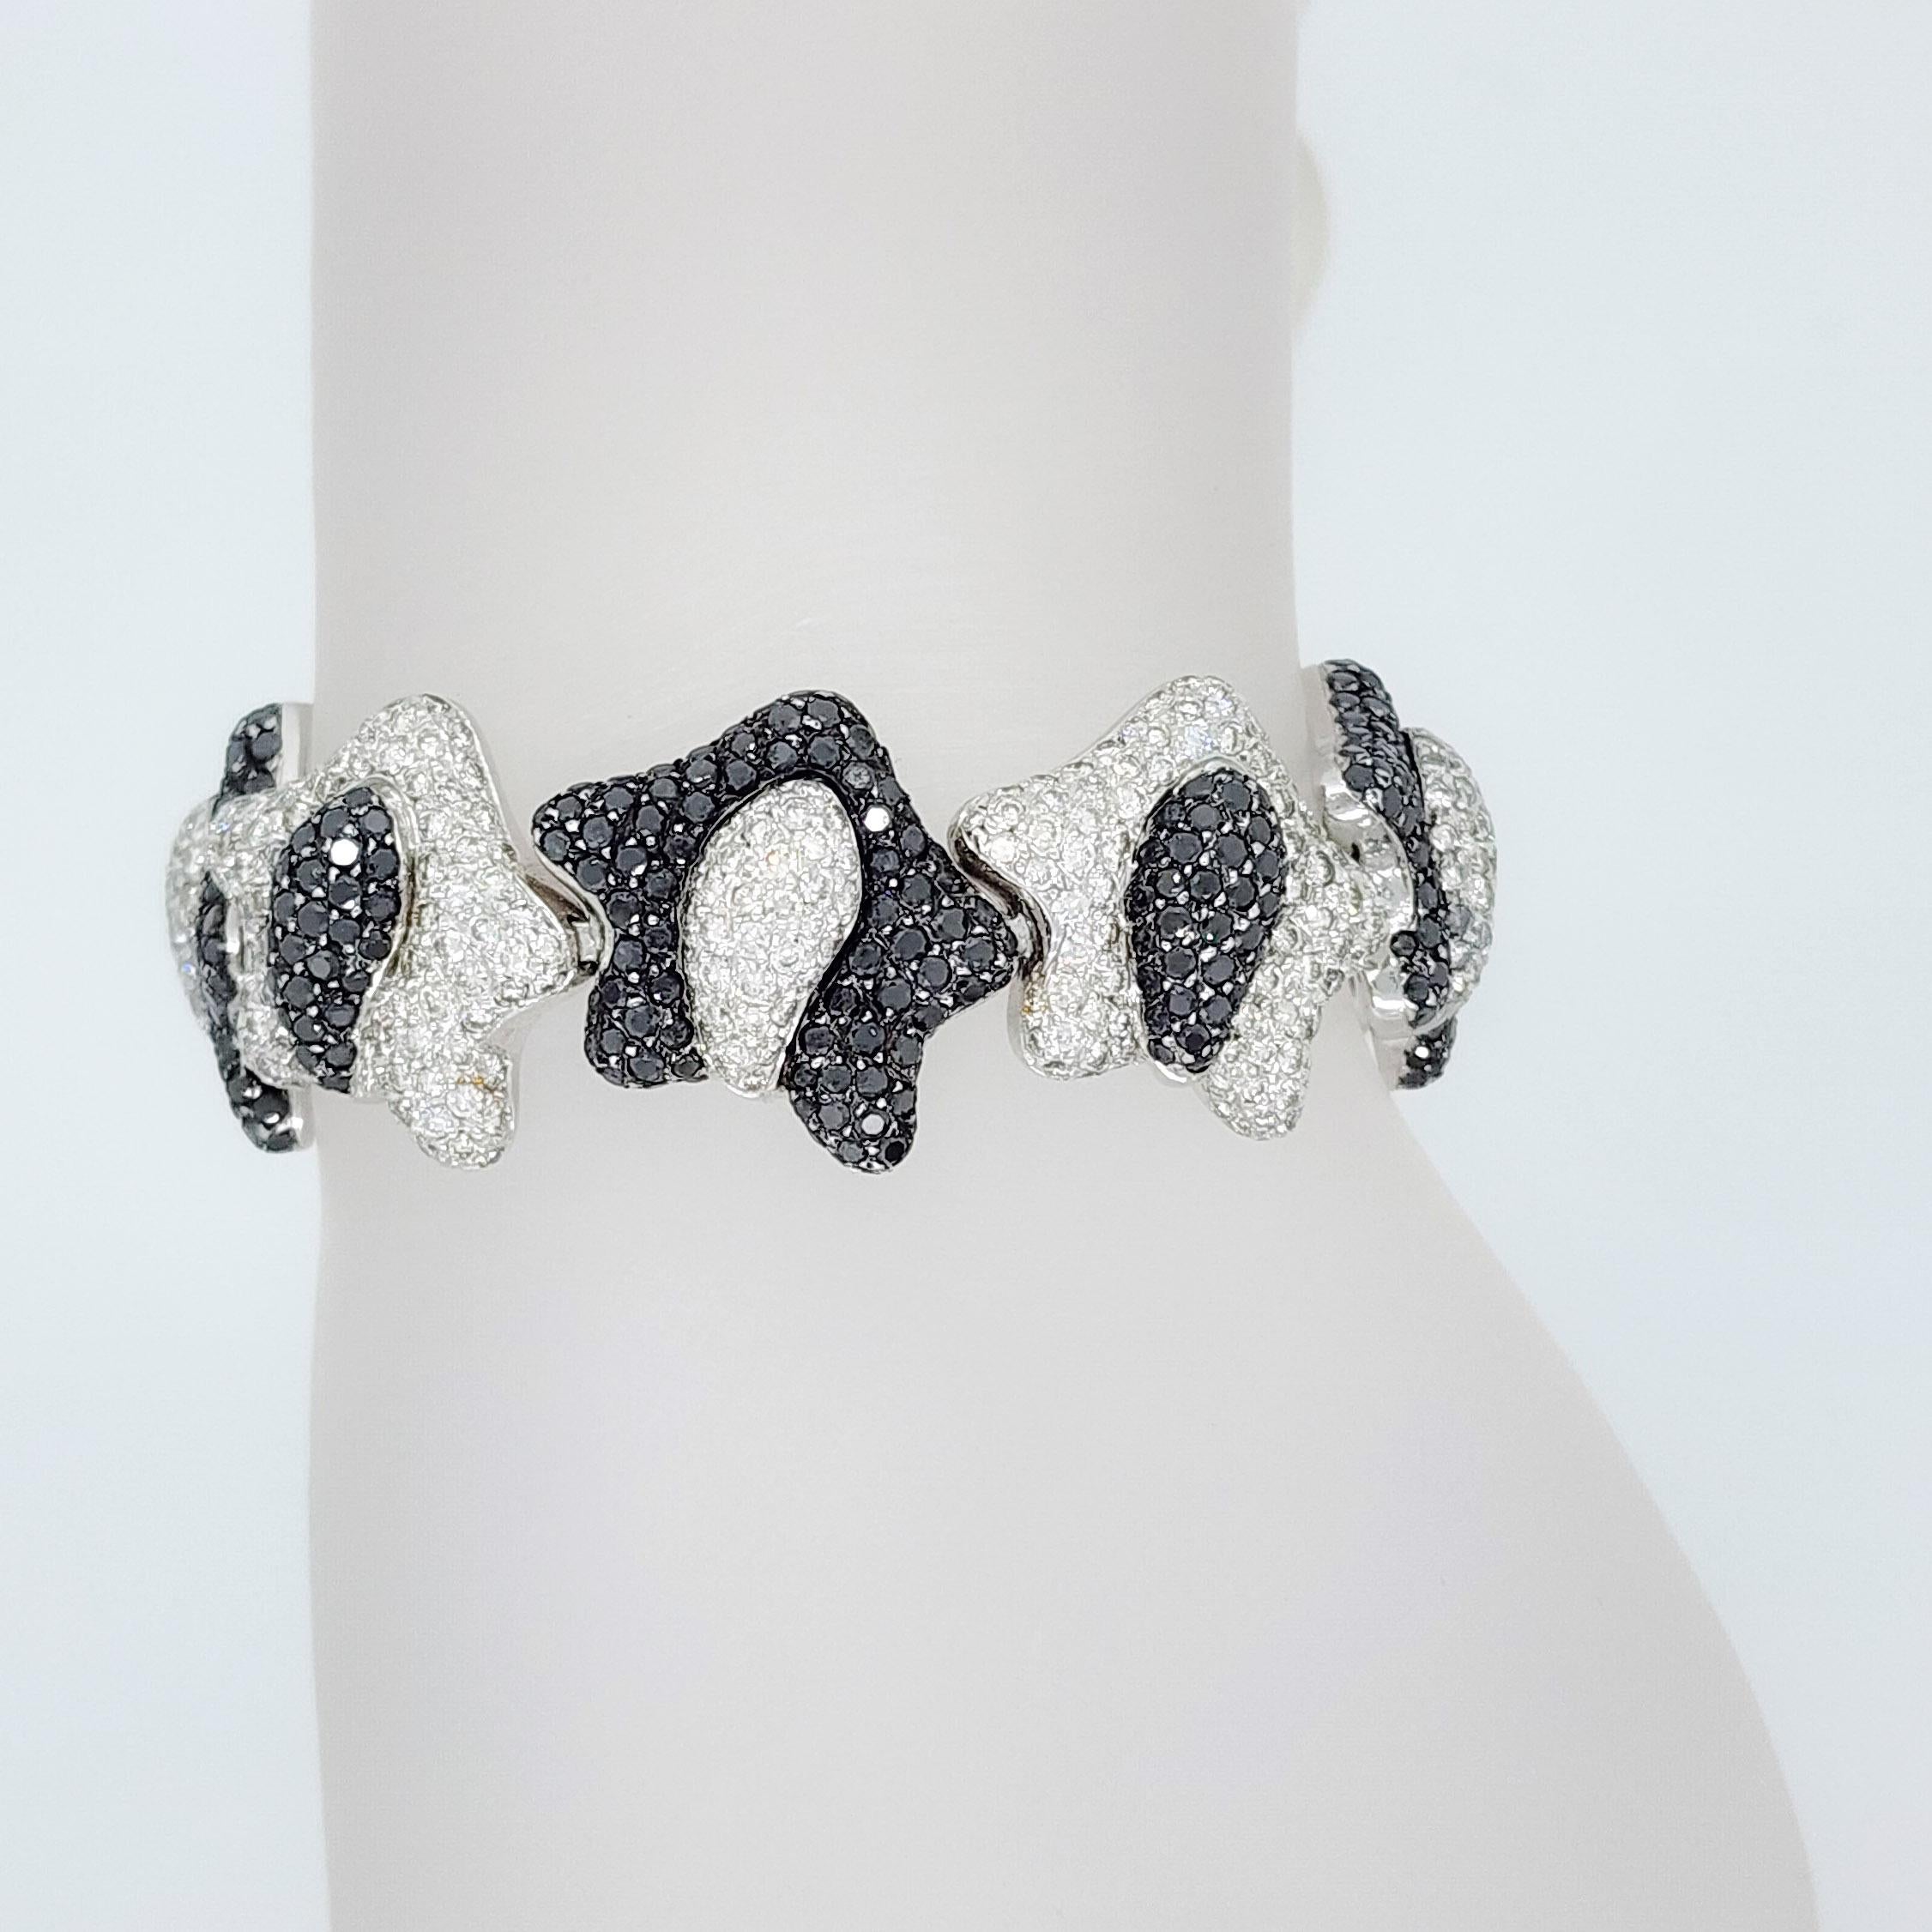 Gorgeous white diamond and black diamond round pave in this fun design bracelet.  Handmade in 18k white gold.  Flexible and made with attention to detail. Length is 7.25